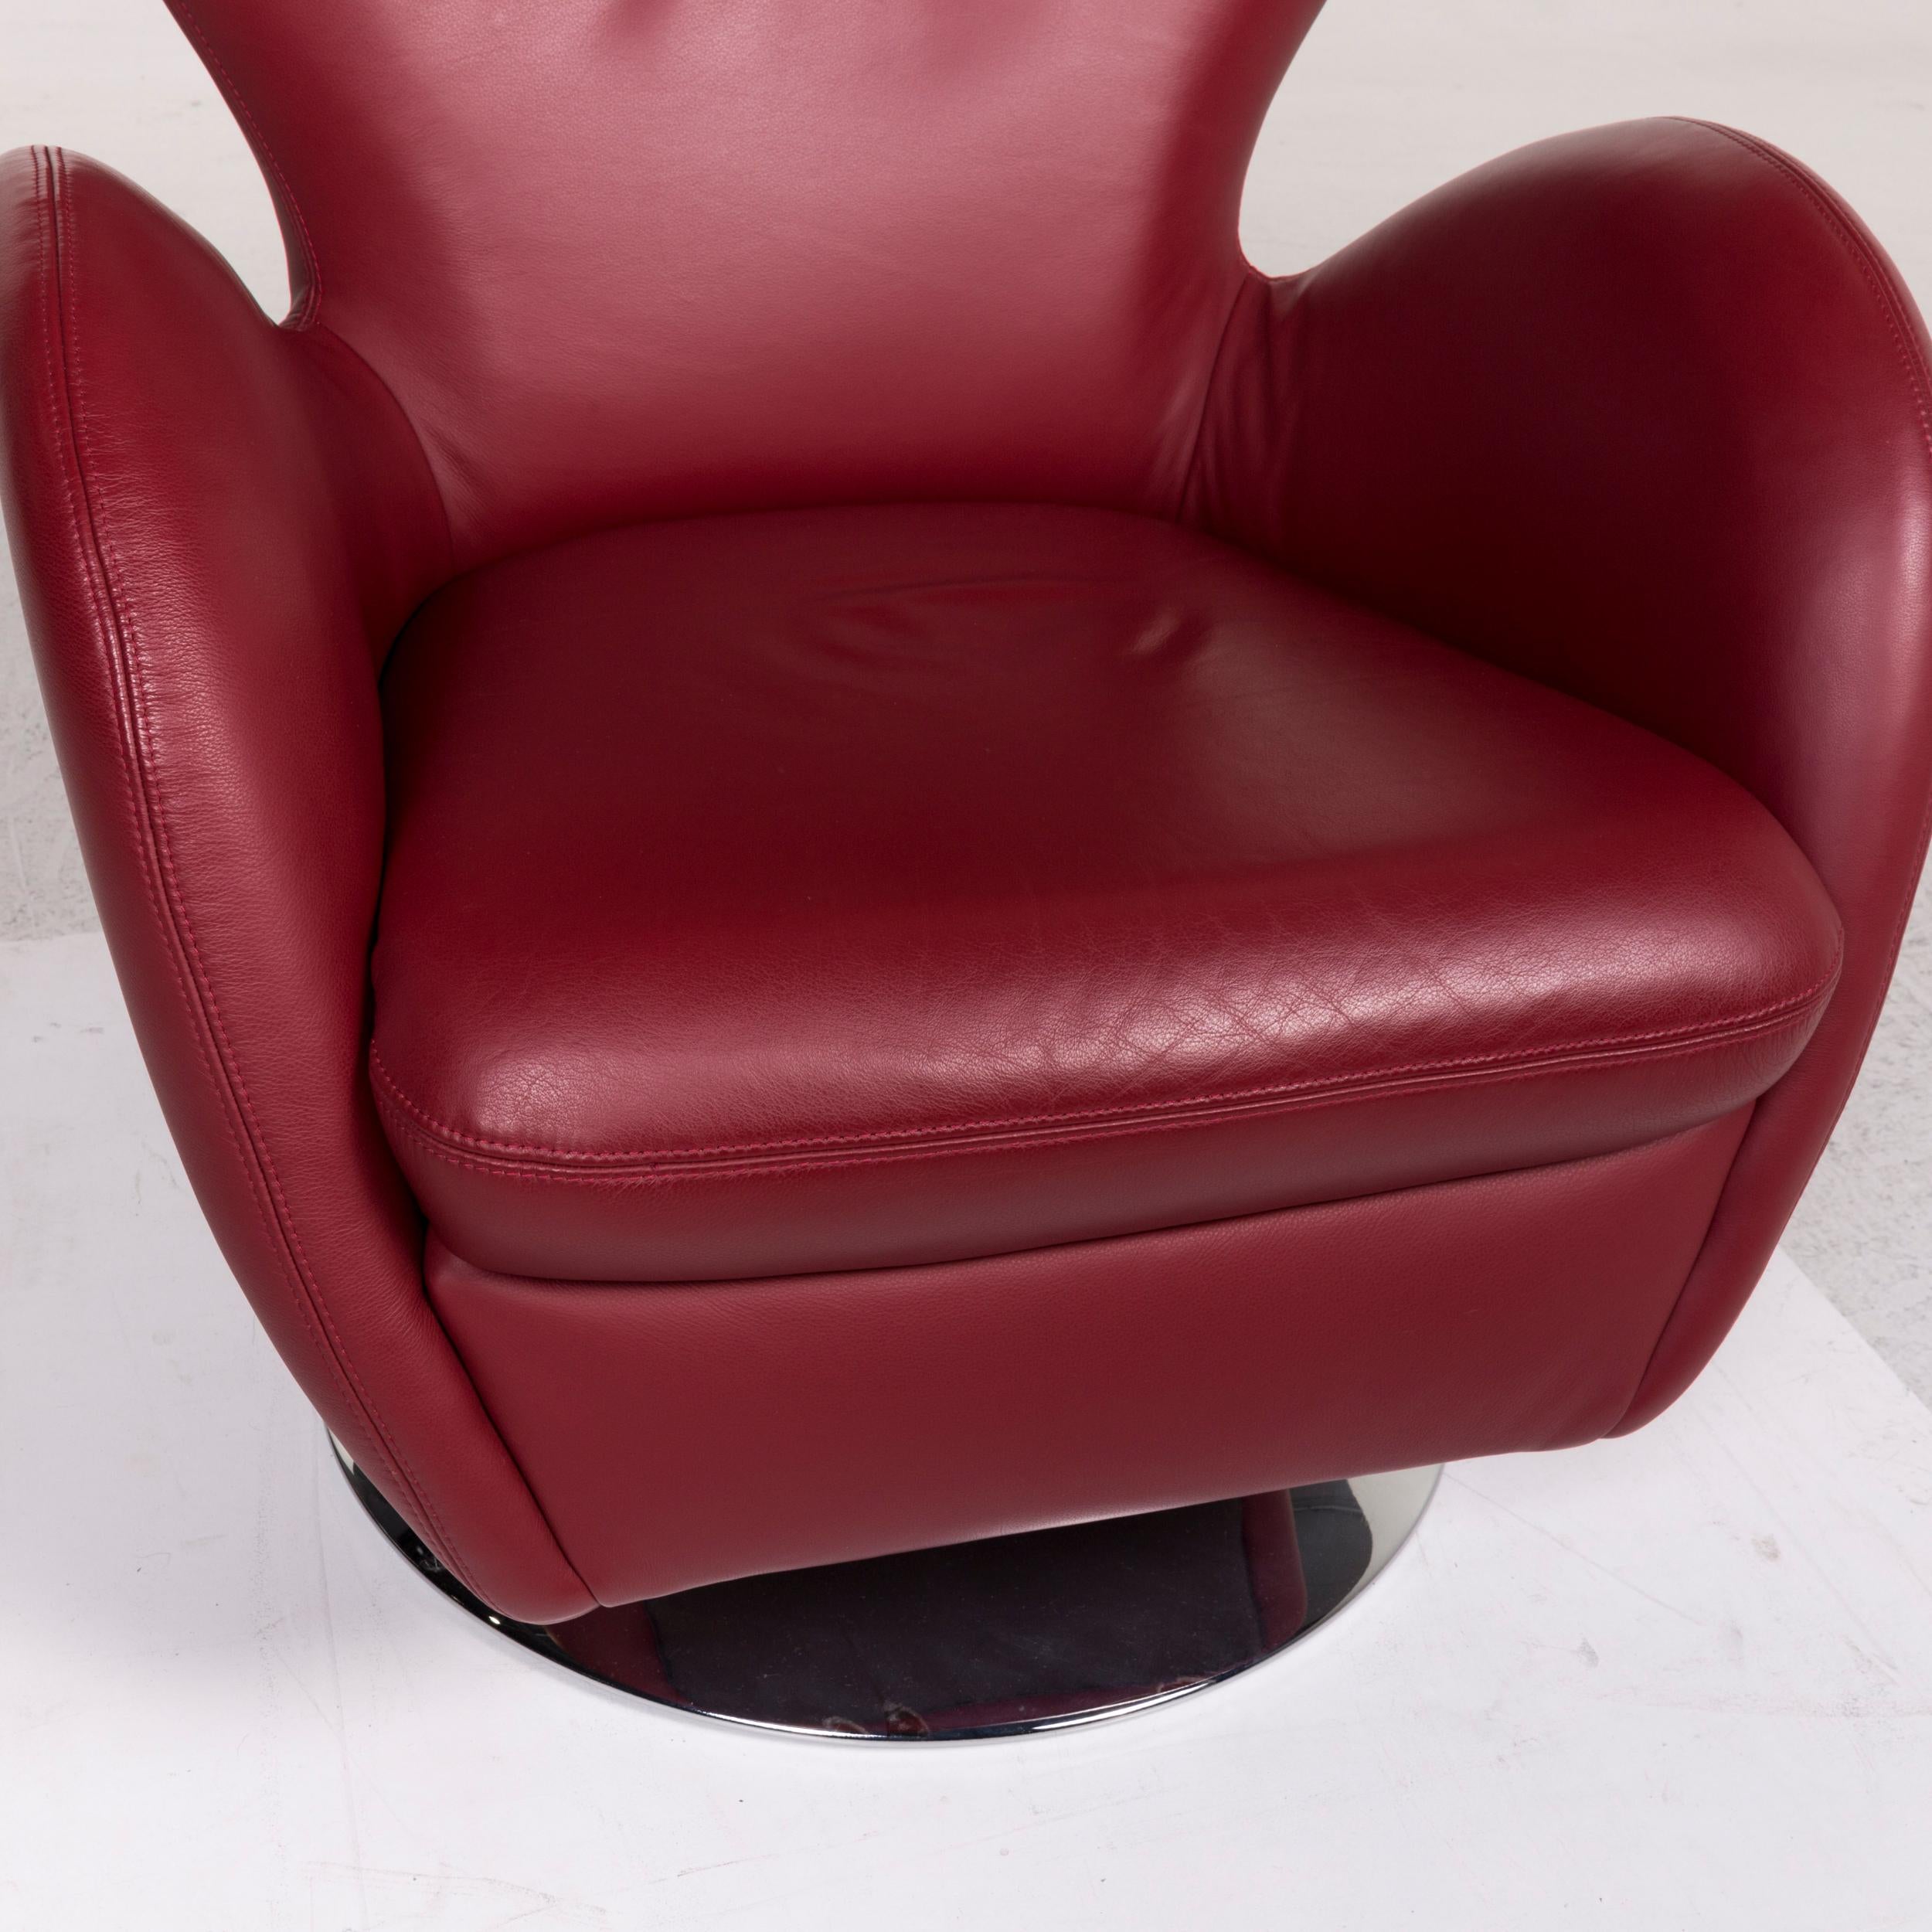 We bring to you a Koinor leather armchair set red 1x armchair 1x stool.
    
 

 Product measurements in centimeters:
 

Depth 80
Width 77
Height 94
Seat-height: 44
Rest-height 63
Seat-depth 56
Seat-width 51
Back-height 52.